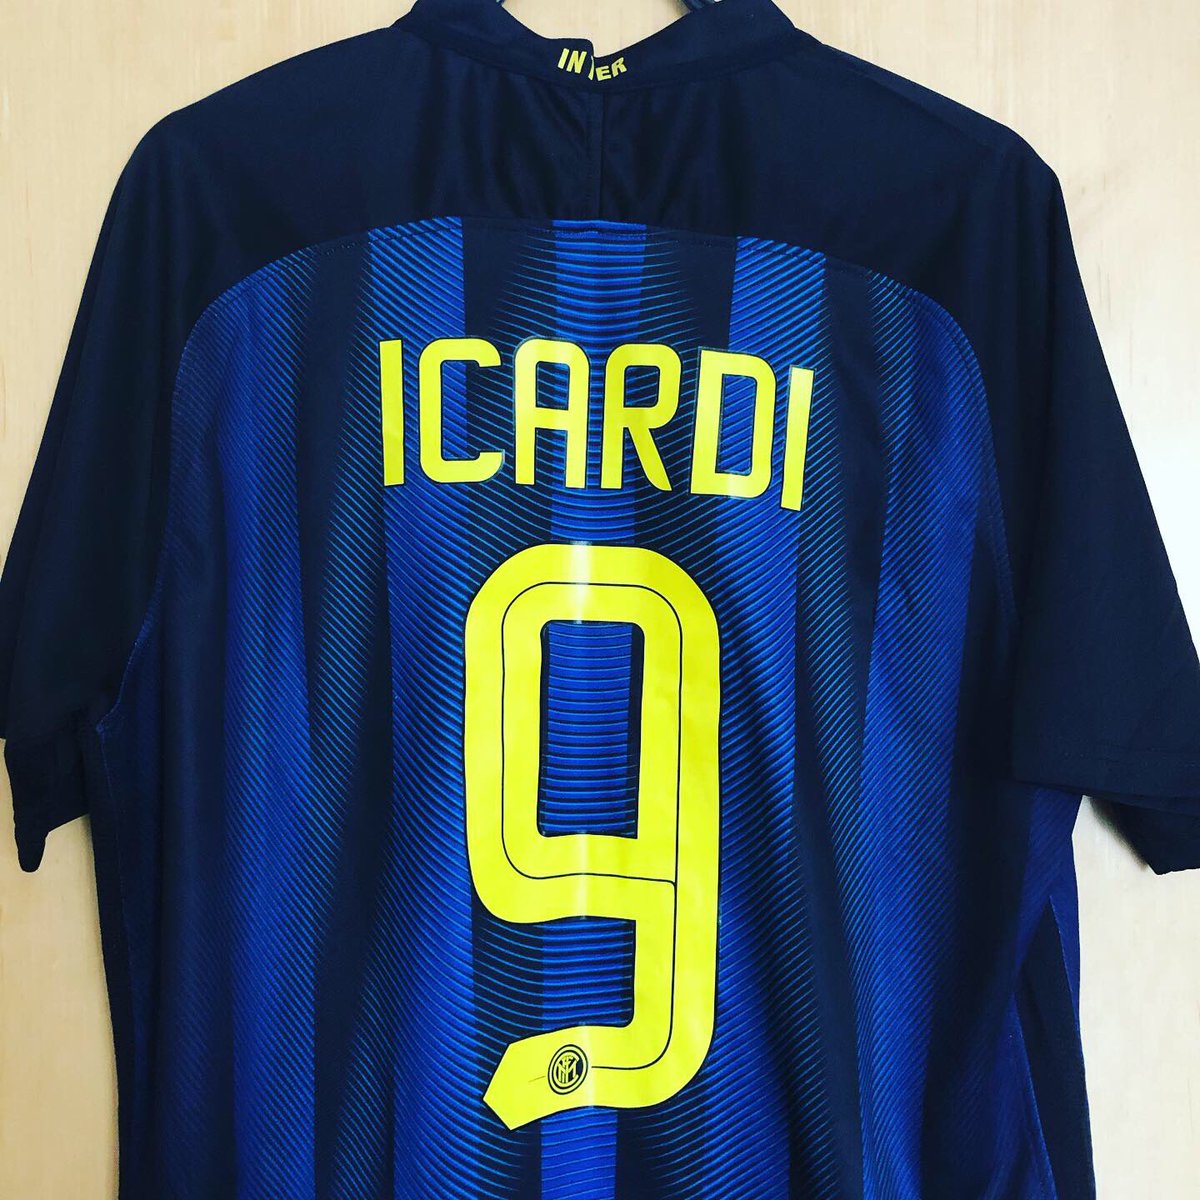 . @inter Home Kit, 2016/17Nike, unofficial replicaPersonalised:  #Icardi 9That’s the way it goes, time to put this ordeal in the past. But we must not forget that, if Inter is where it is now, it owes it also to the best striker it’s had in this decade.